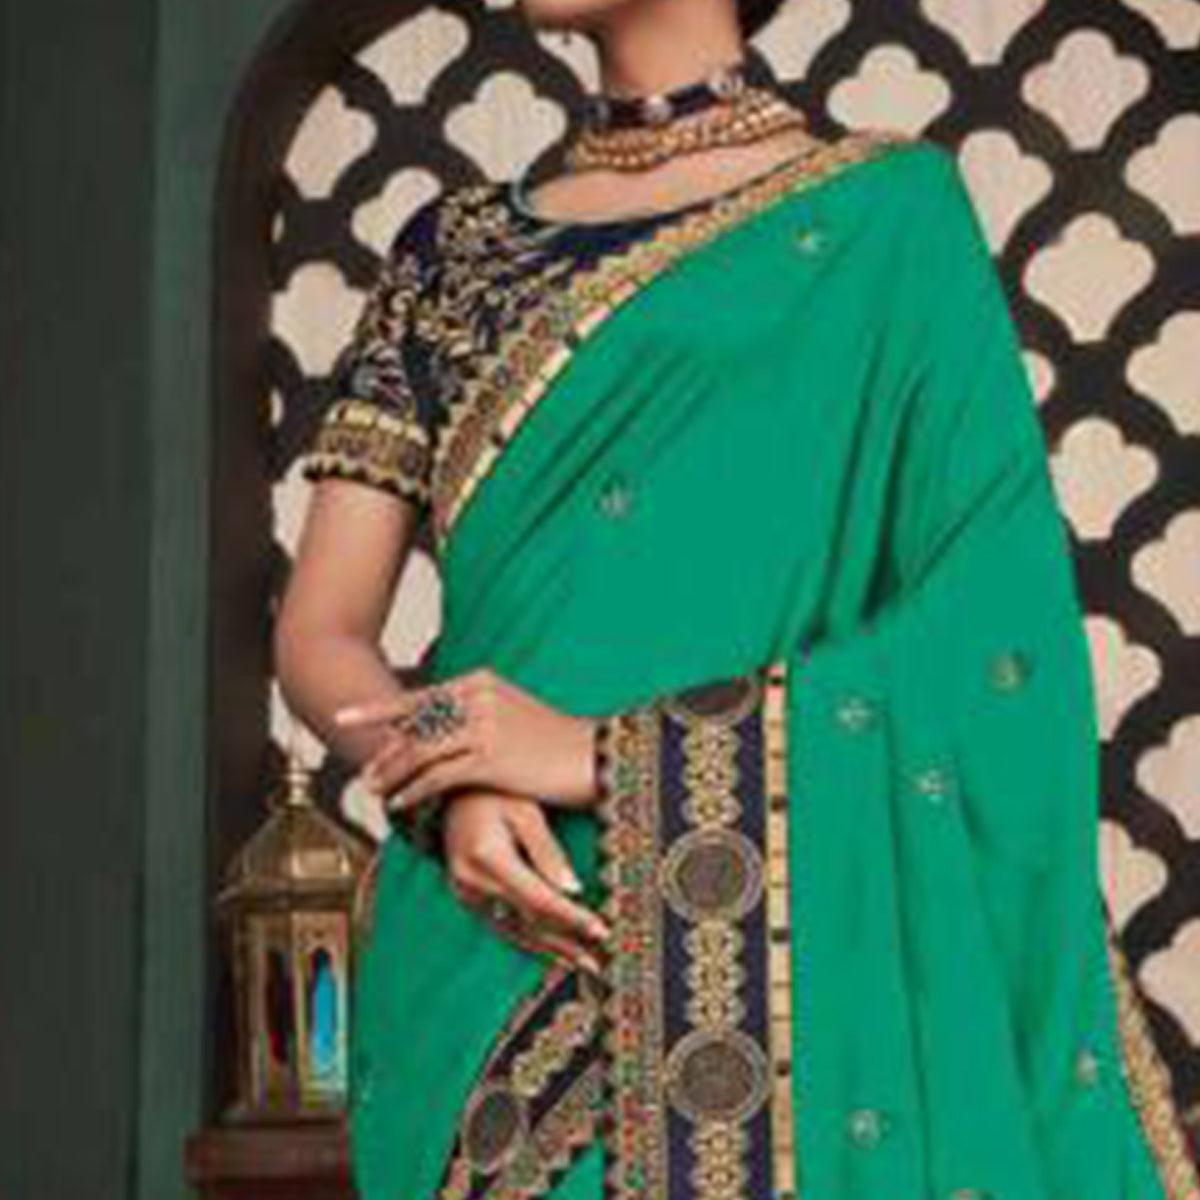 Jazzy Turquoise Green Colored Festive Wear Embroidered Heavy Border Silk Saree - Peachmode